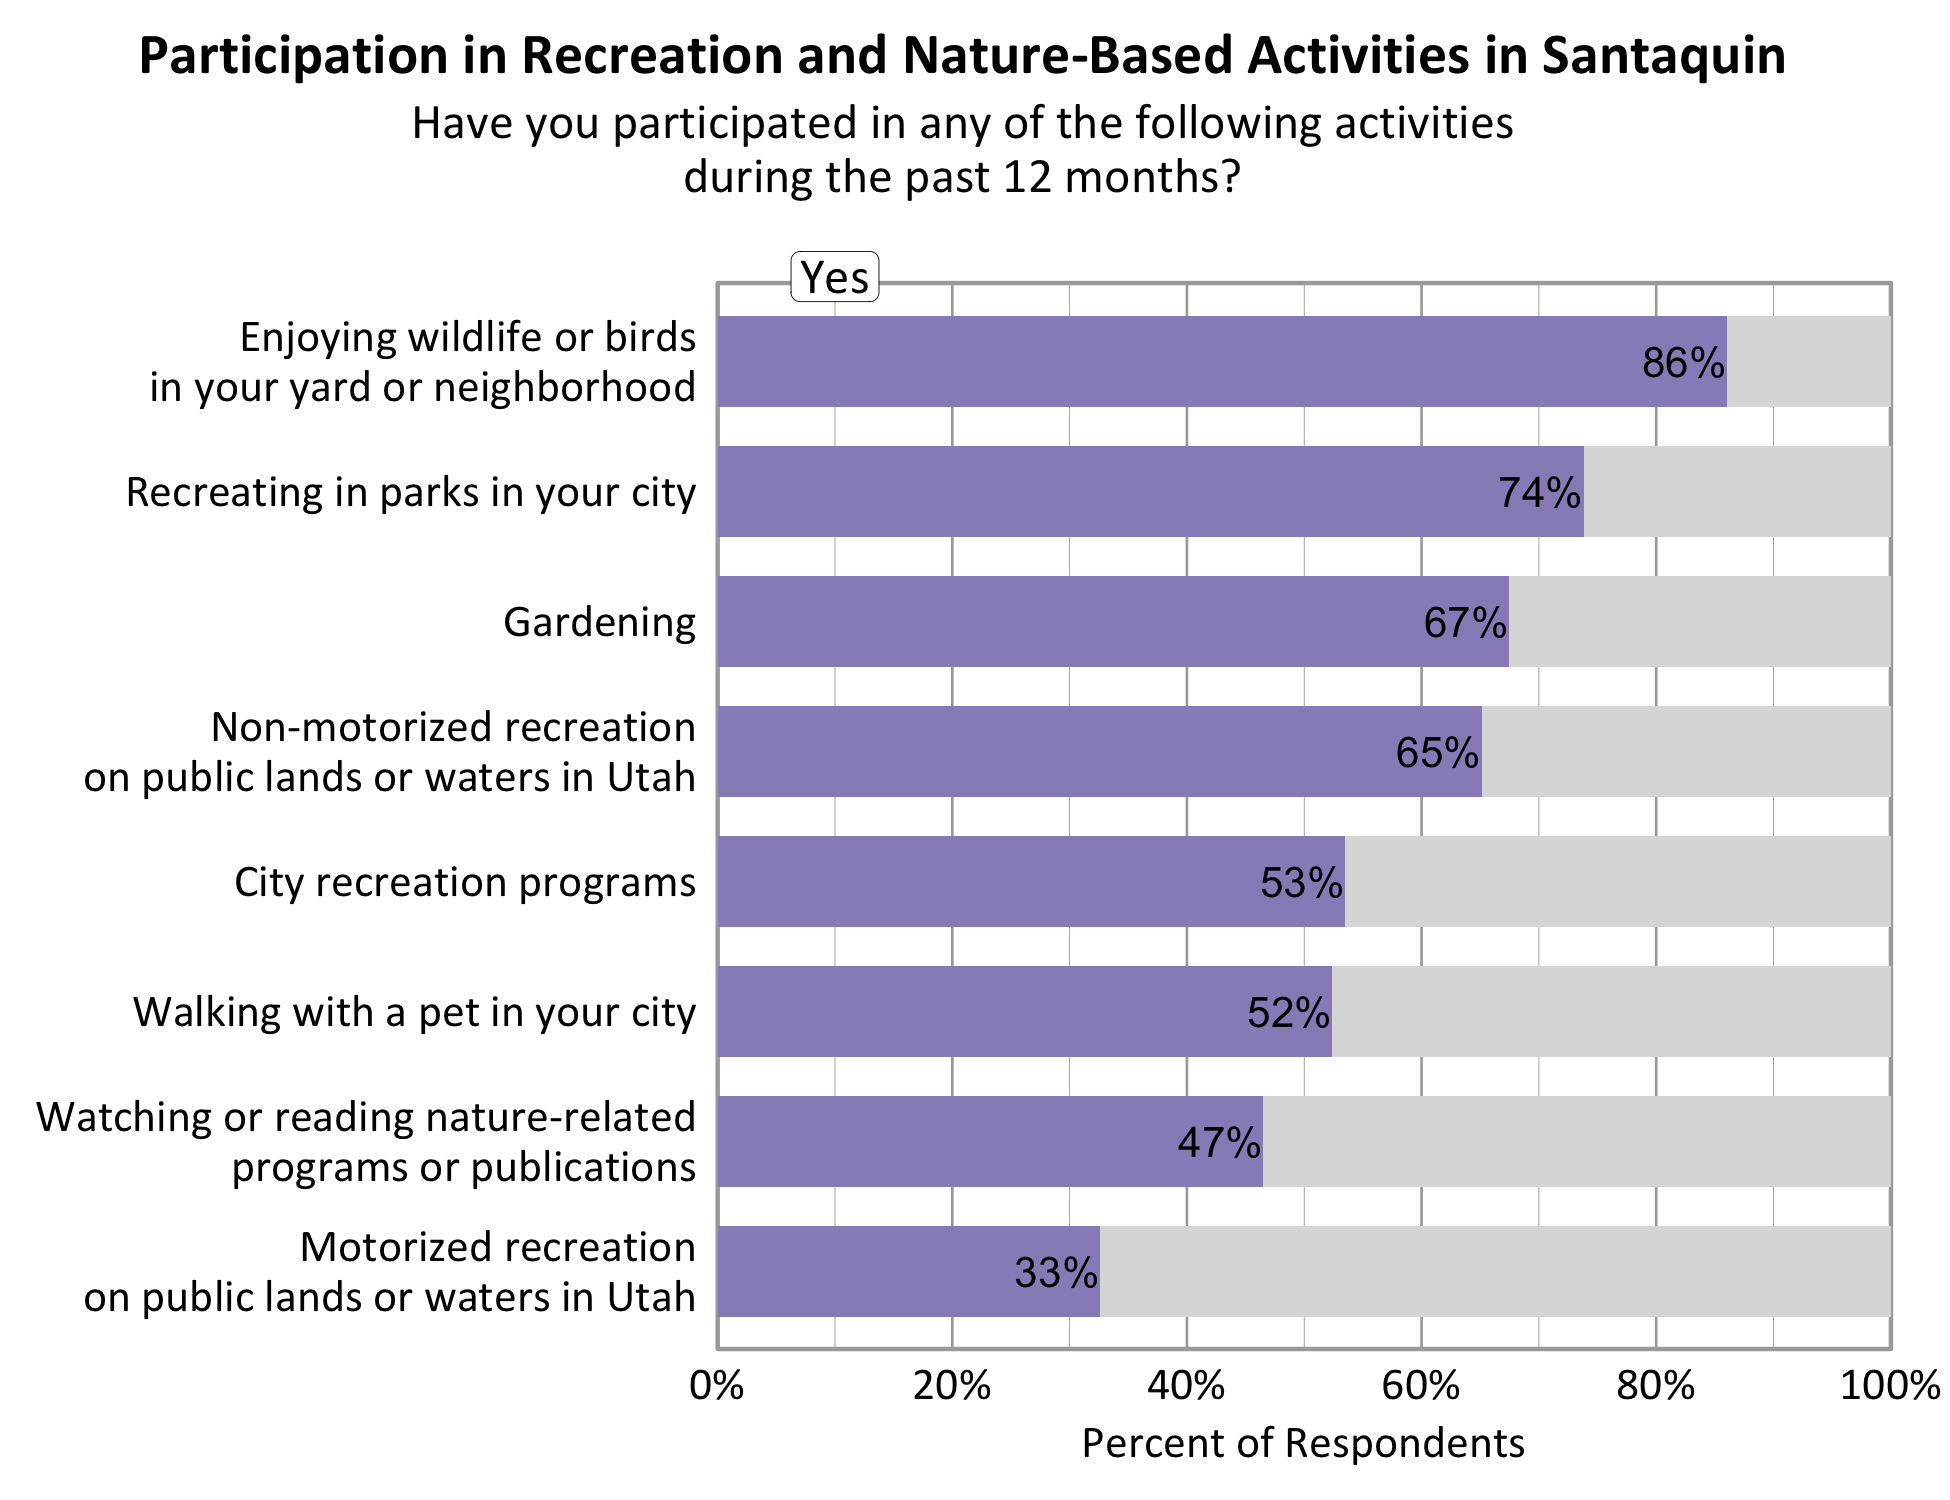 Type: Bar Graph Title: Participation in Recreation and Nature-based Activities in Santaquin. Subtitle: Have you participated in any of the following activities during the past 12 months? Data - 65% of respondents indicated yes to non-motorized recreation on public lands or waters in Utah. 86% of respondents indicated yes to enjoying wildlife or birds in your yard or neighborhood. 33% of respondents indicated yes to motorized recreation on public lands or waters in Utah. 74% of respondents indicated yes to recreating in parks in your city. 67% of respondents indicated yes to gardening. 53% of respondents indicated yes to city recreation programs. 47% of respondents indicated yes to watching or reading nature-related programs or publications. 52% of respondents indicated yes to walking with a pet in your city.